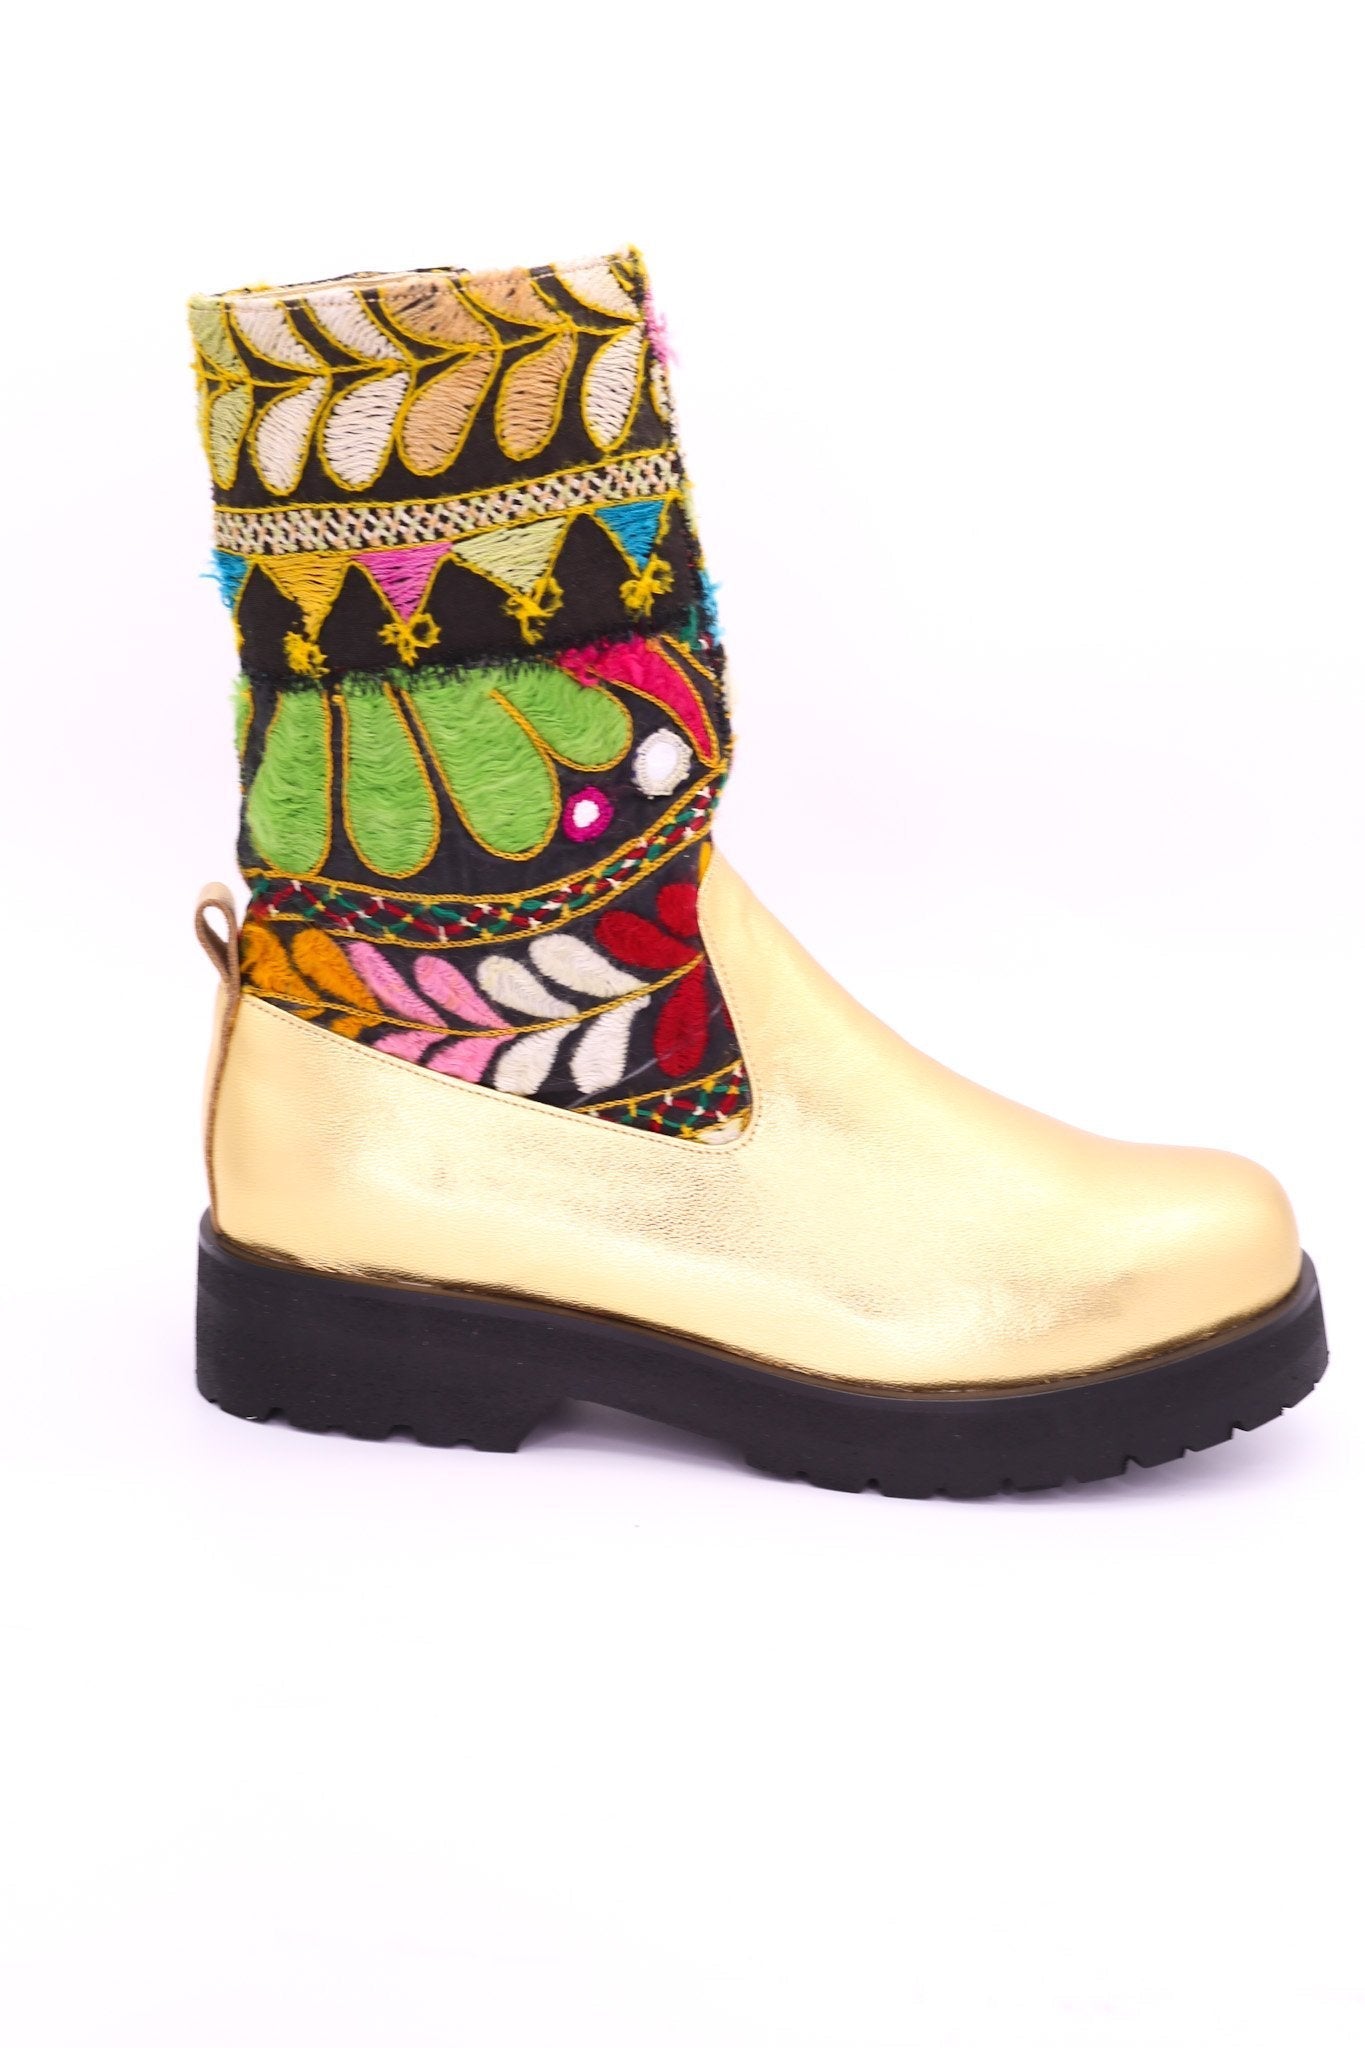 GOLD STOMPY CHELSEA BOOTS FREJA - sustainably made MOMO NEW YORK sustainable clothing, boots slow fashion